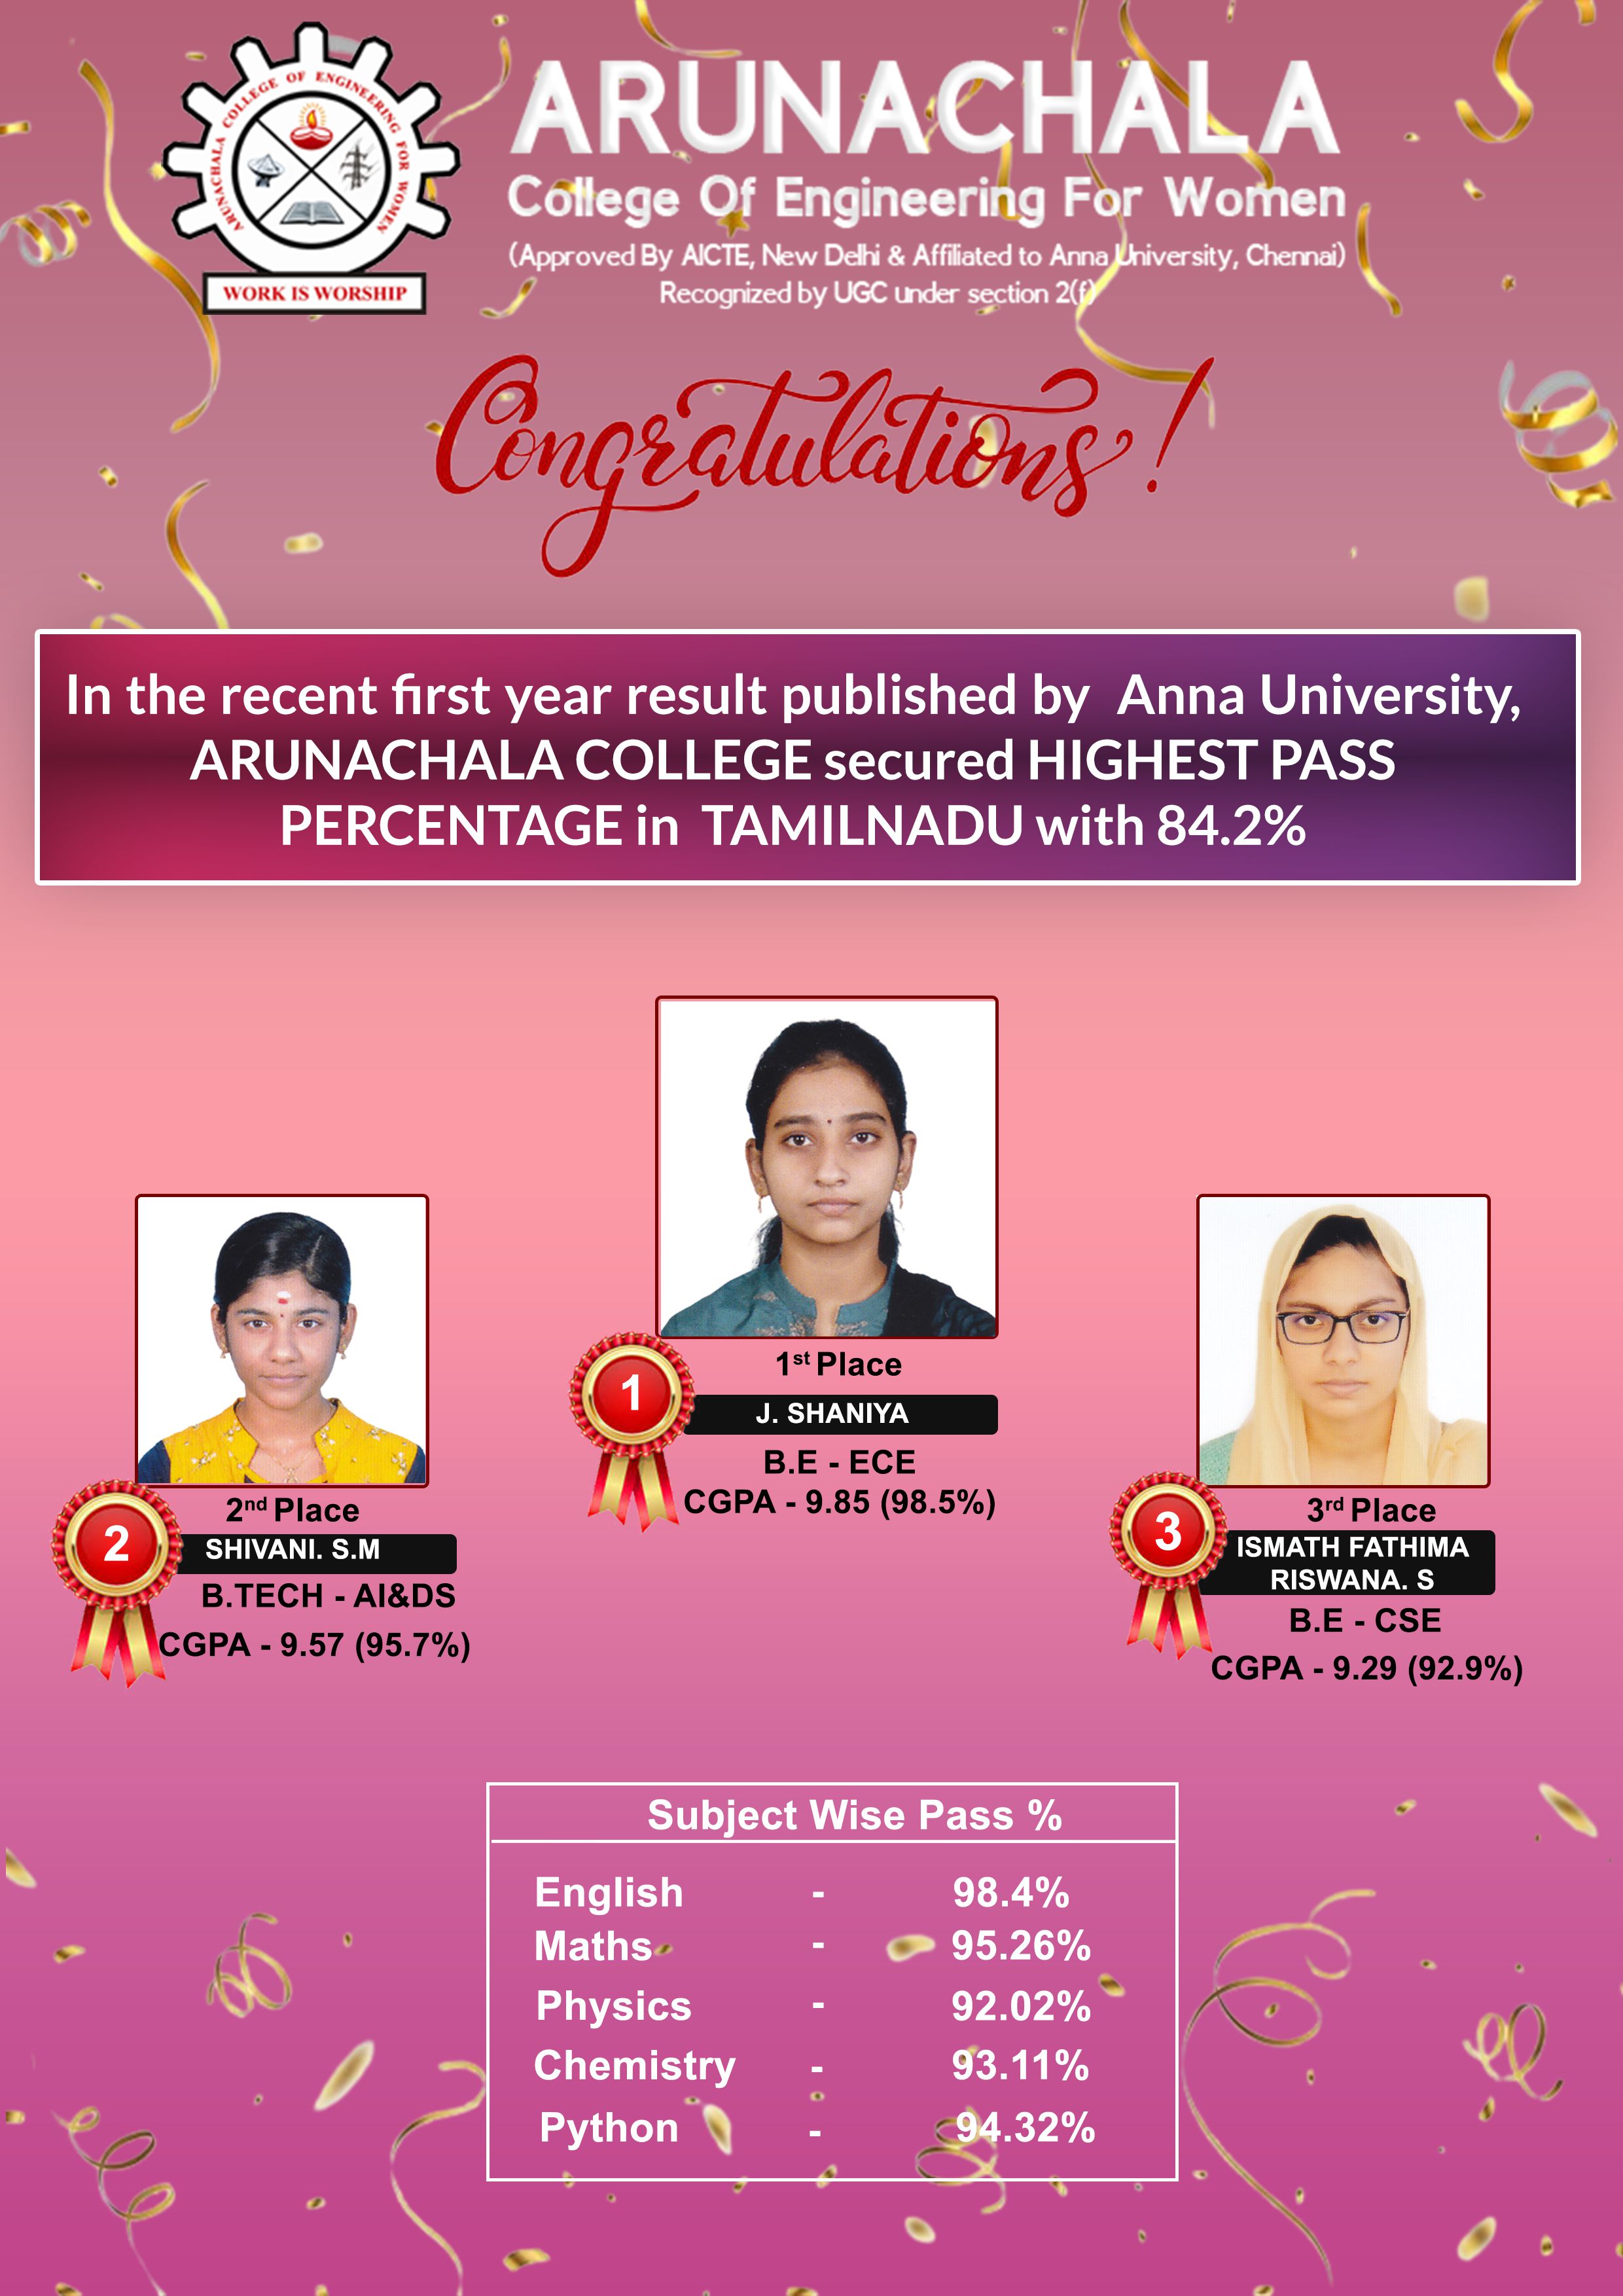 In the recent first year result published by Anna University, Arunachala College secured highest pass percentage in Tamilnadu with 84.2%.